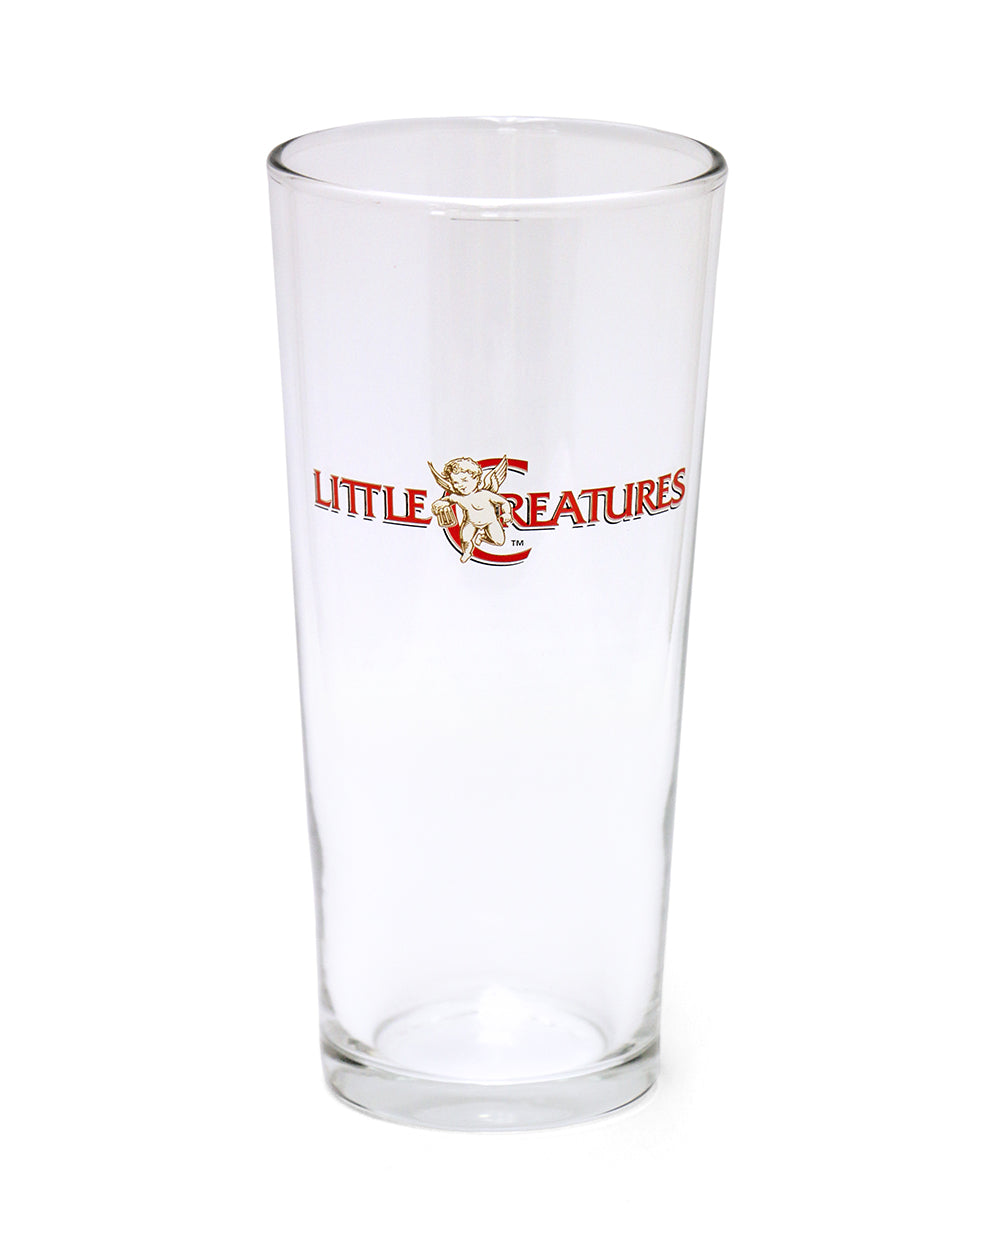 Little Creatures Glasses 12pc -  Beer Gear Apparel & Merchandise - Speights - Lion Red - VB - Tokyo Dy merch